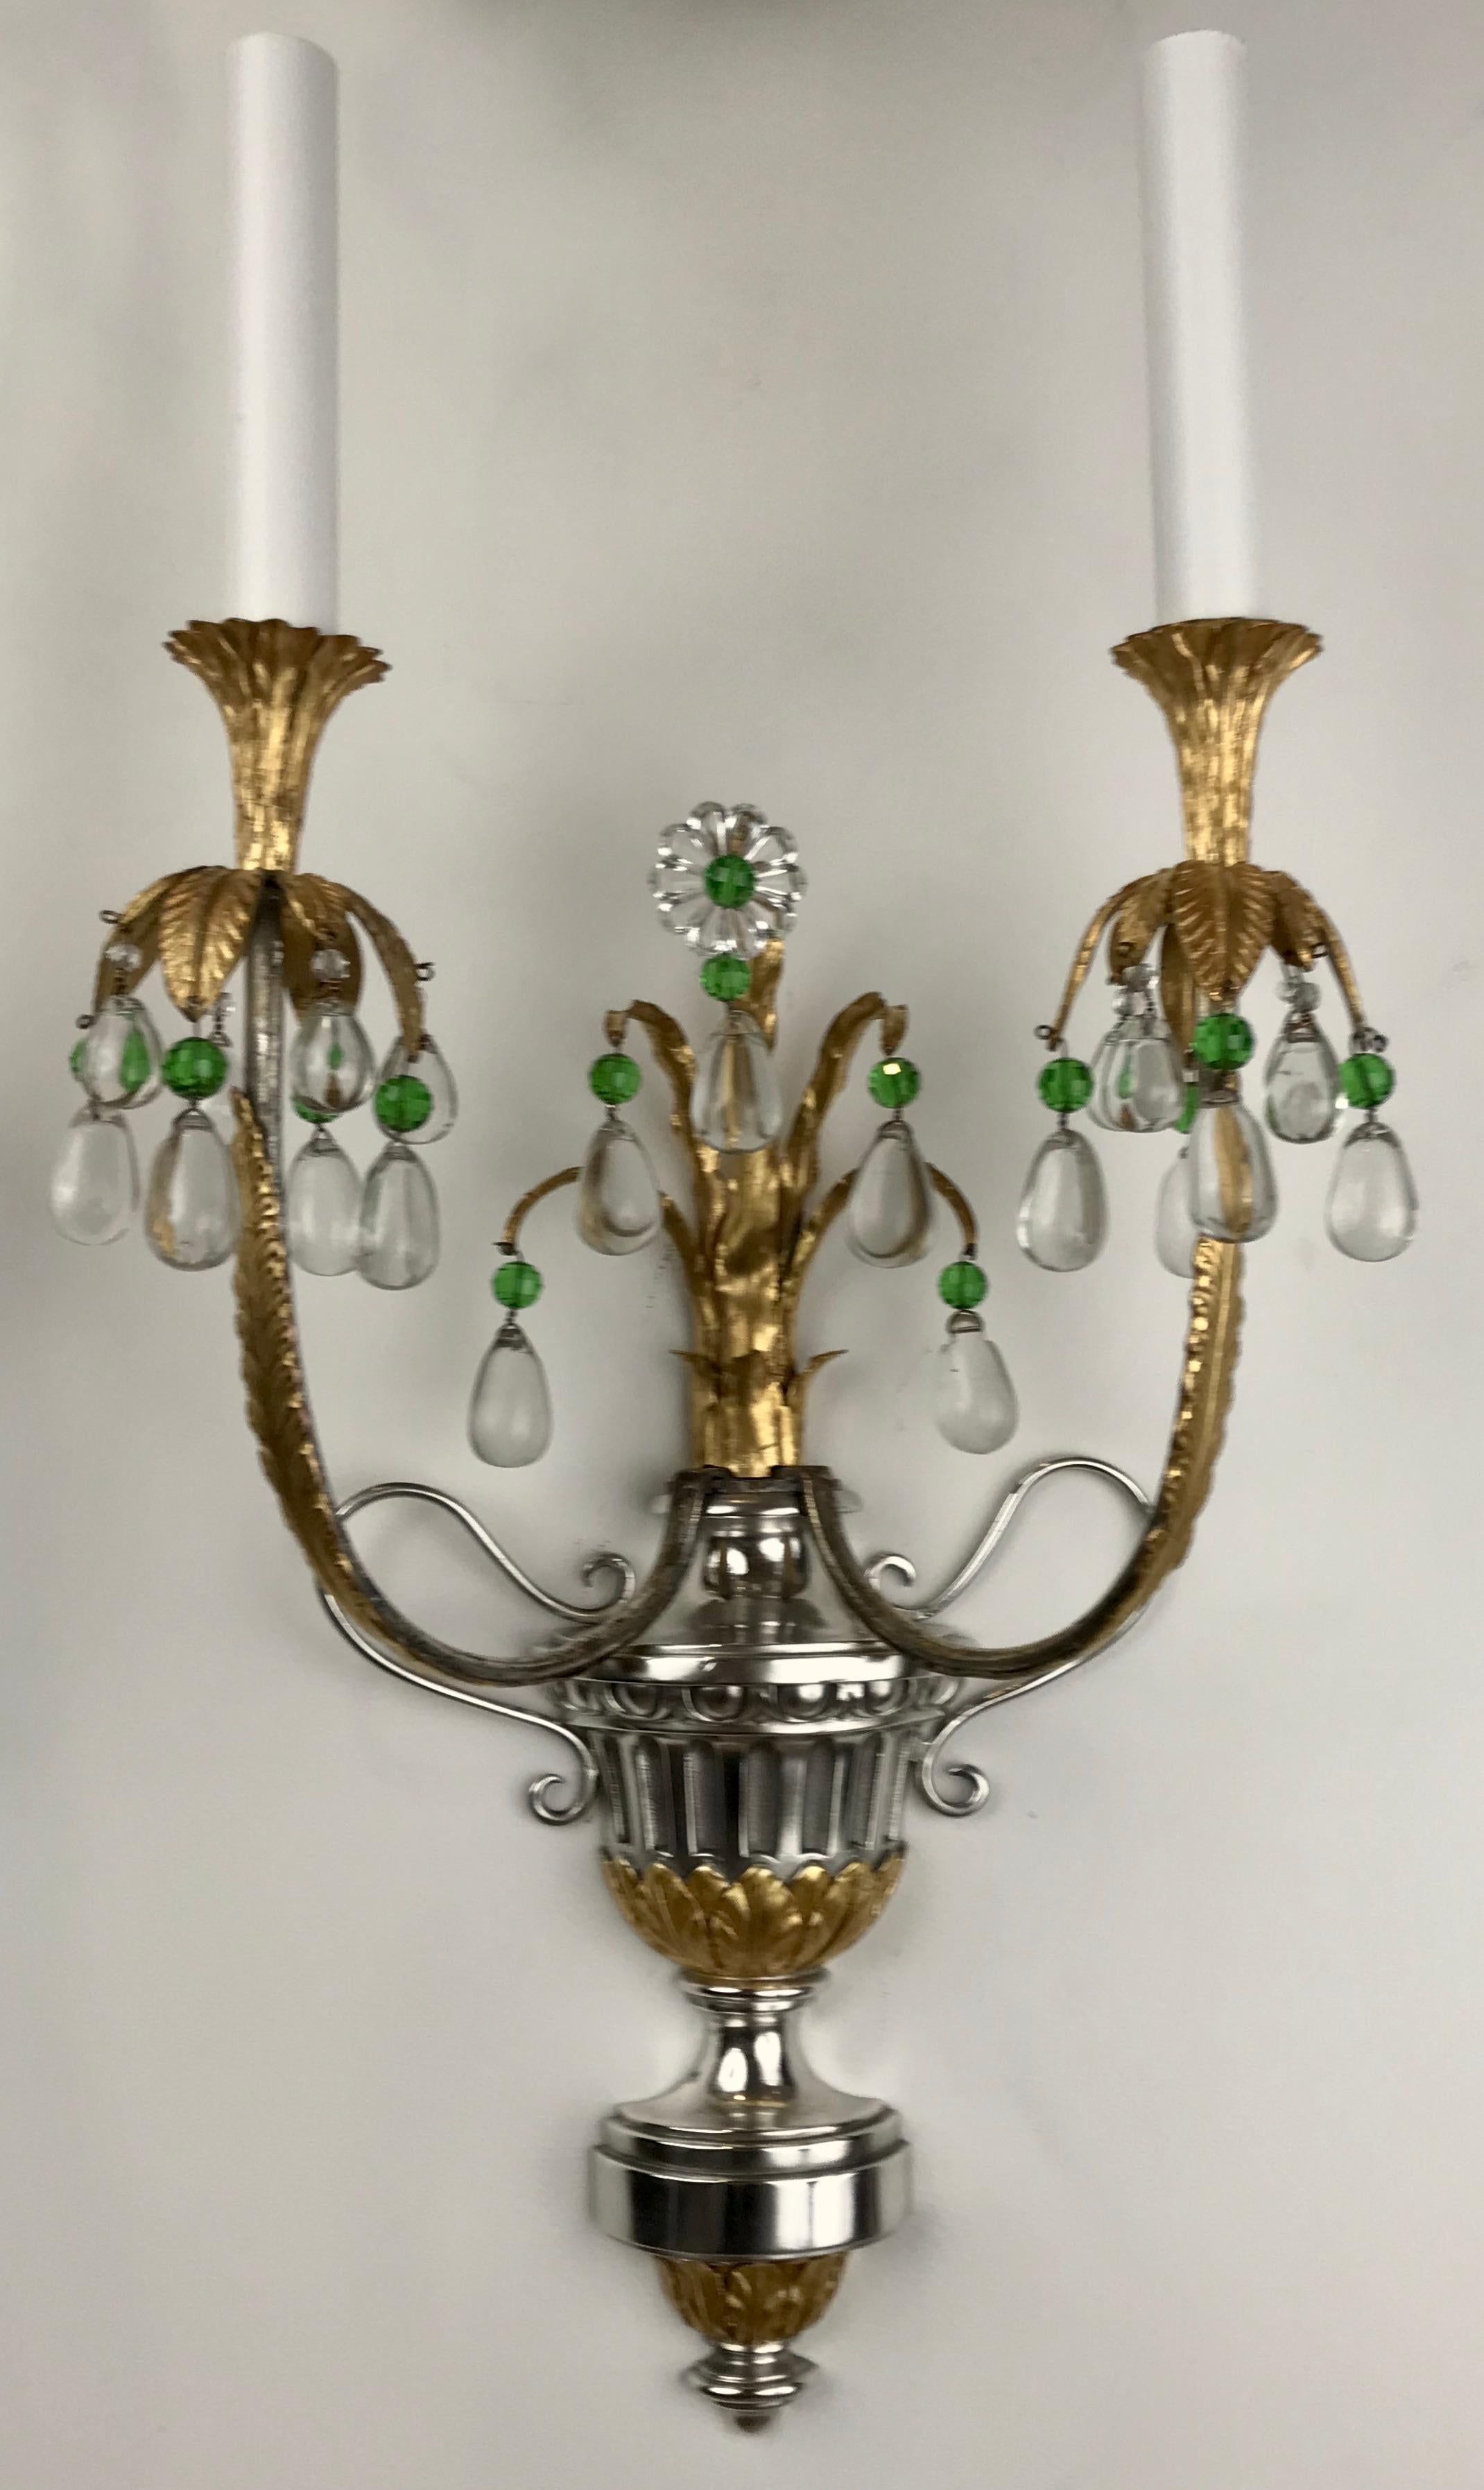 Hollywood Regency  Four Silver and Gilt Bronze Sconces with Green Crystal Accents by Caldwell For Sale